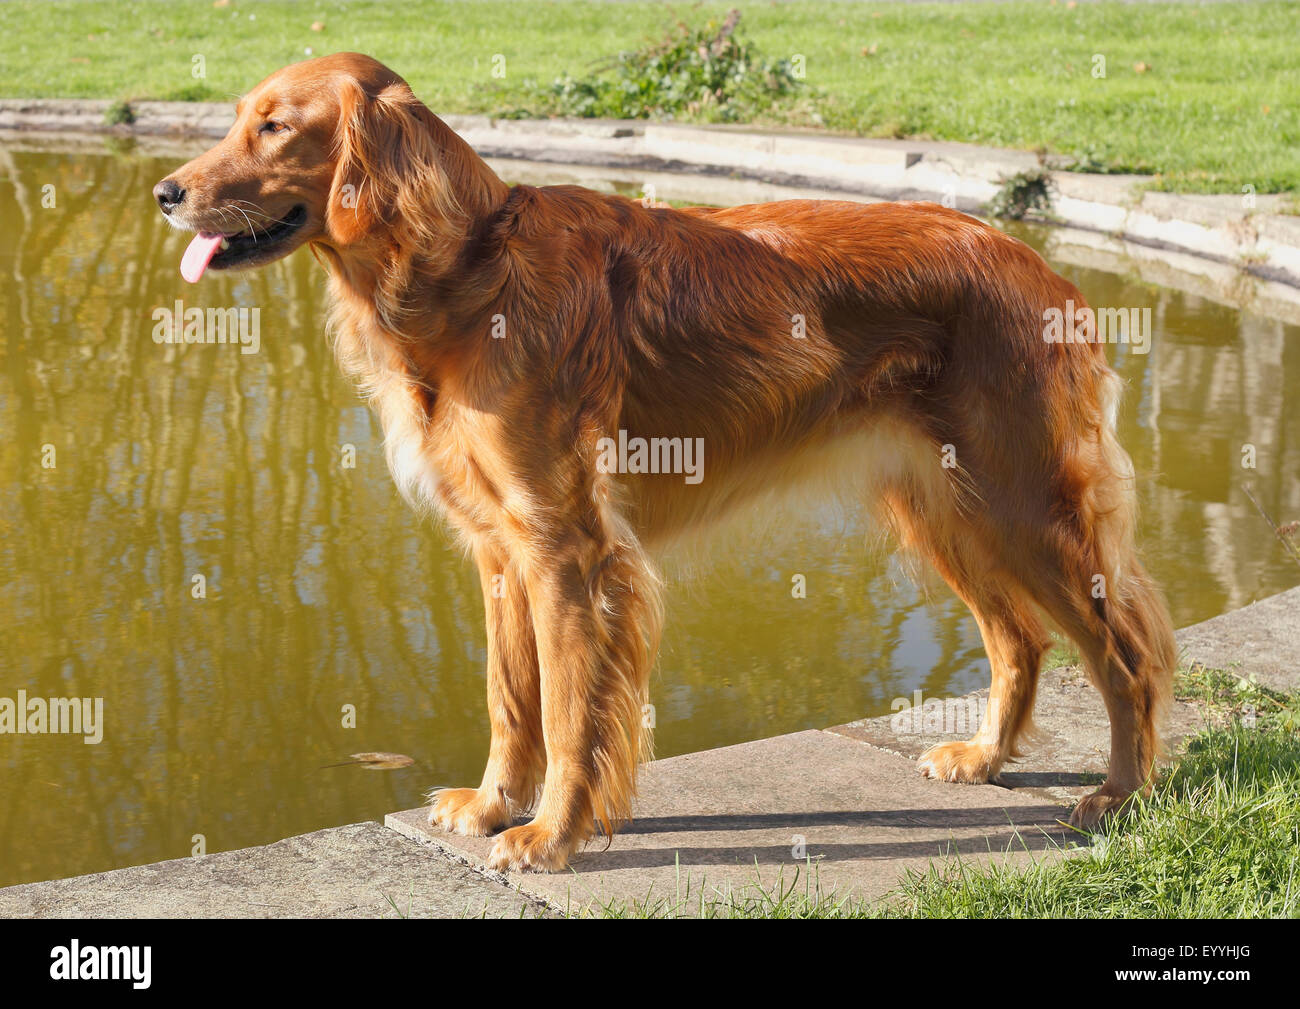 breed dog lupus f. familiaris), four years old Golden Retriever Irish Red Setter breed she-dog standing at a pond, Germany Stock Photo - Alamy